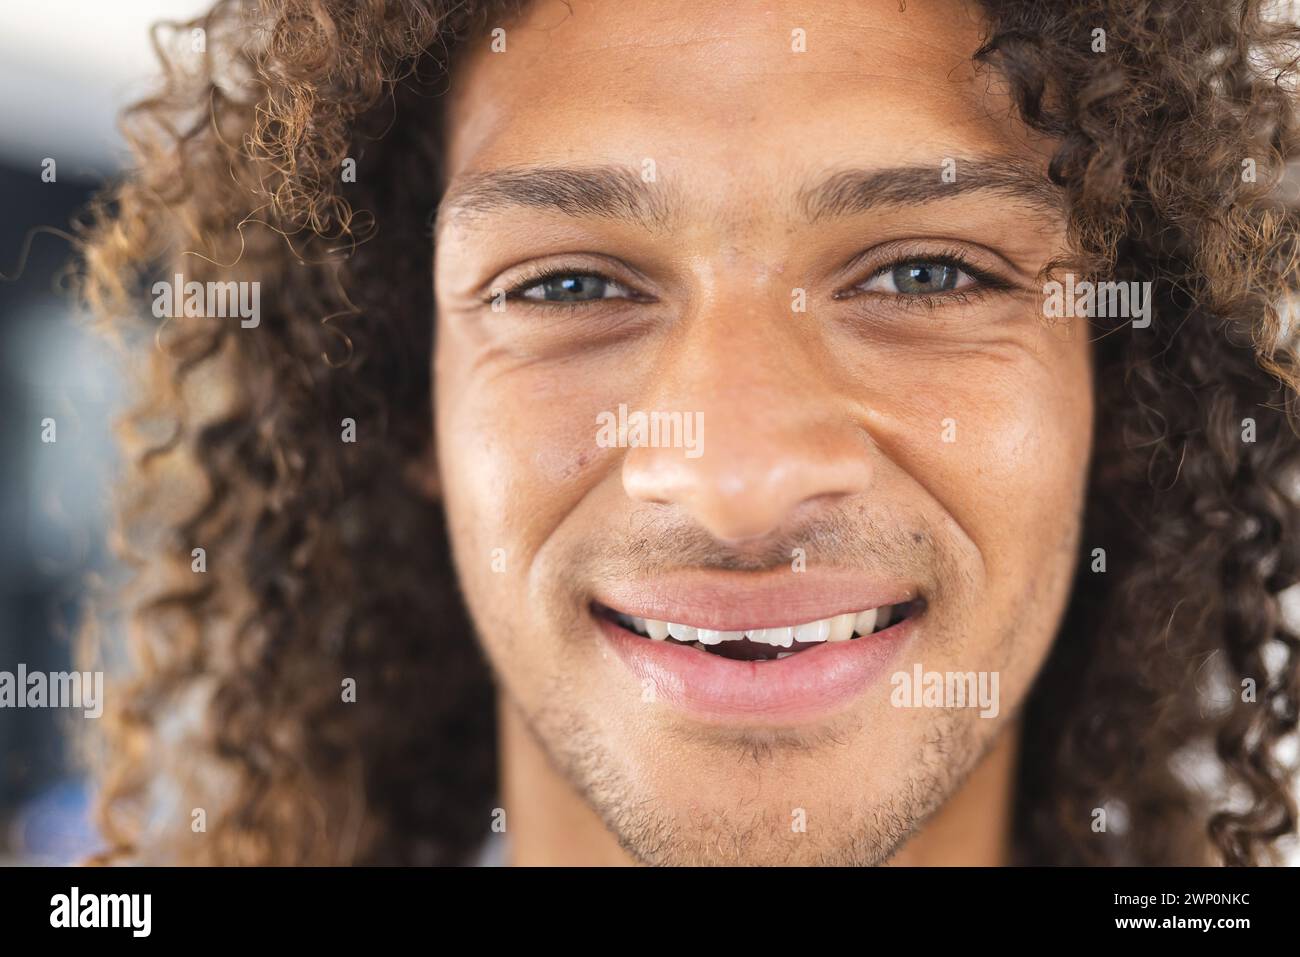 A young biracial man with curly hair smiles warmly at the camera Stock Photo